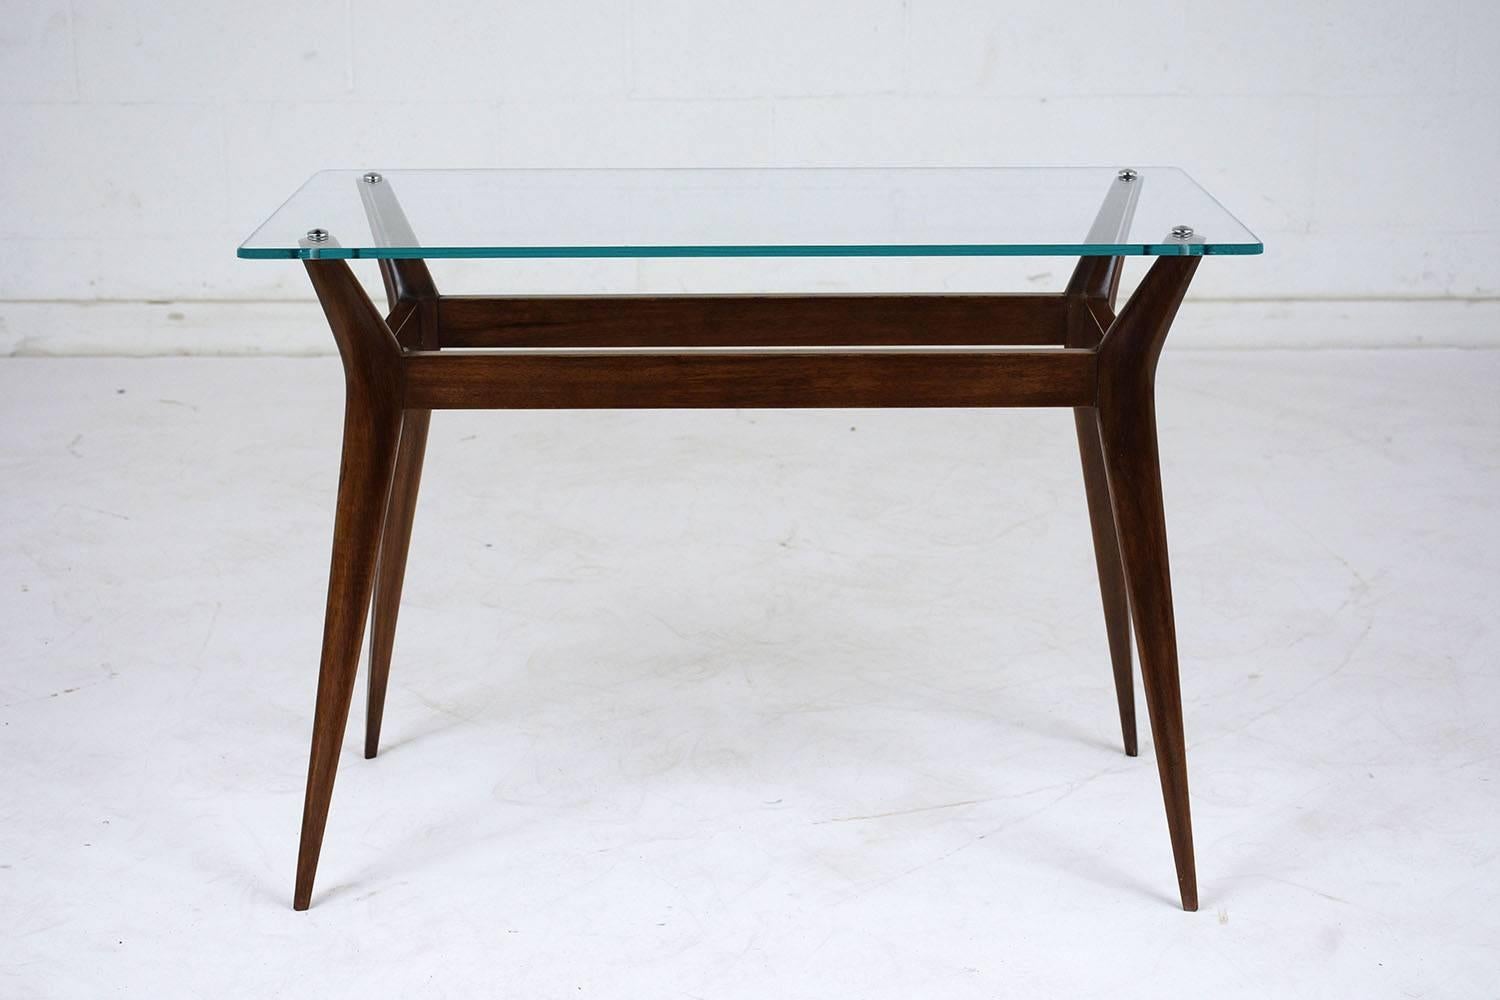 This 1960s Mid-Century Modern-style side table features a teak wood base stained in a rich walnut color with a lacquered finish. The table has a glass top with a flat polish attached to the stretched tapered legs. This side table is sturdy, sleek,